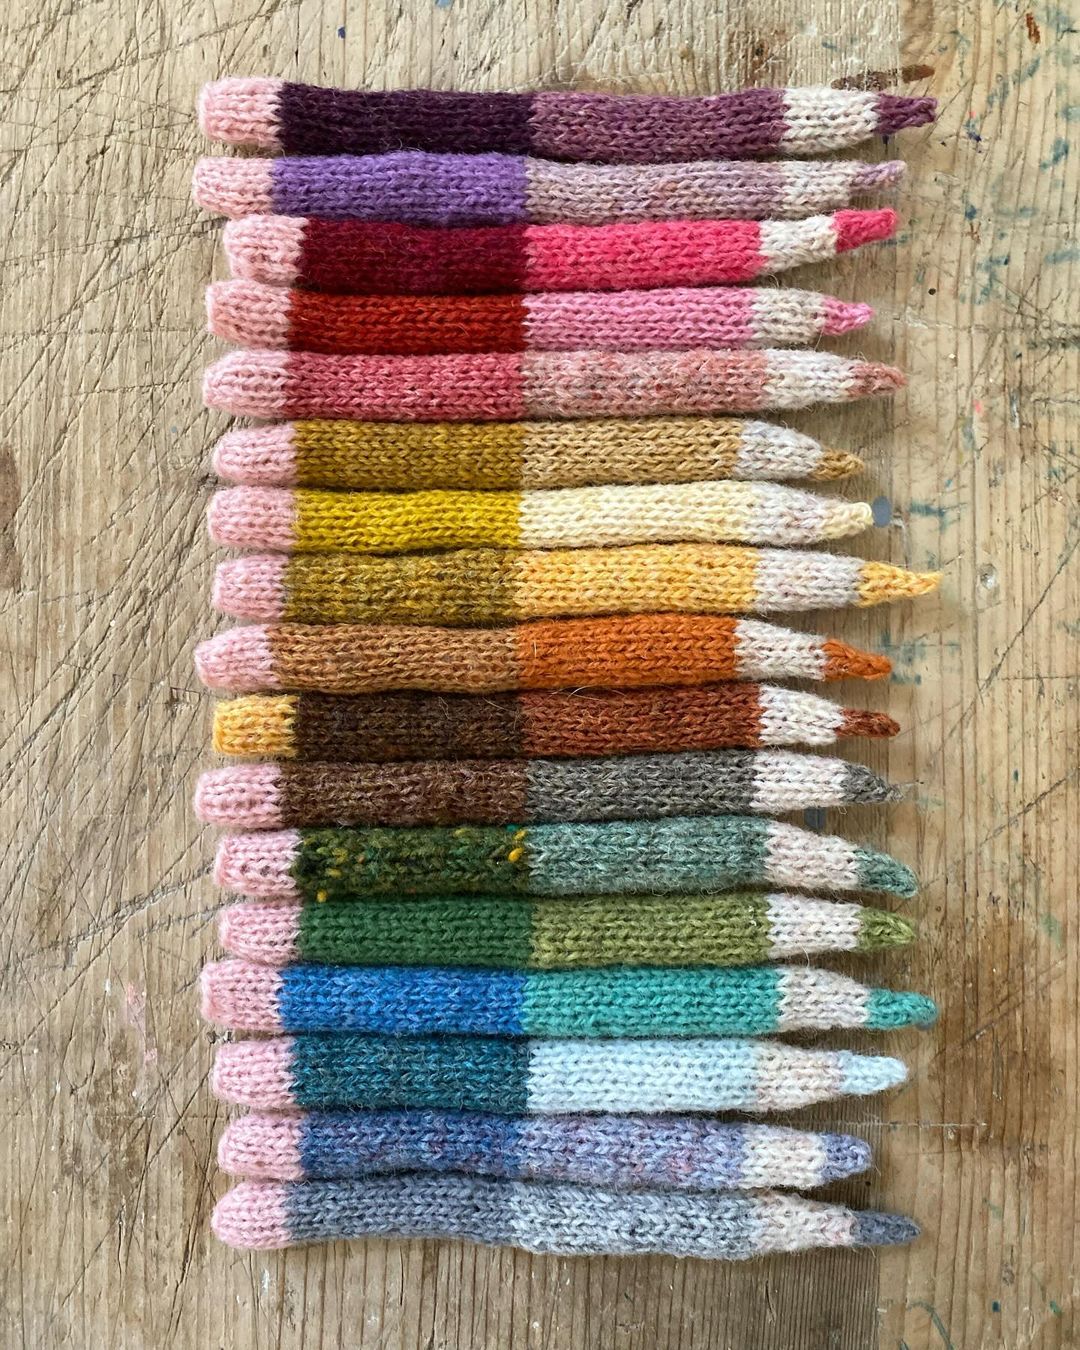 hand knit pencils in ranbow colors